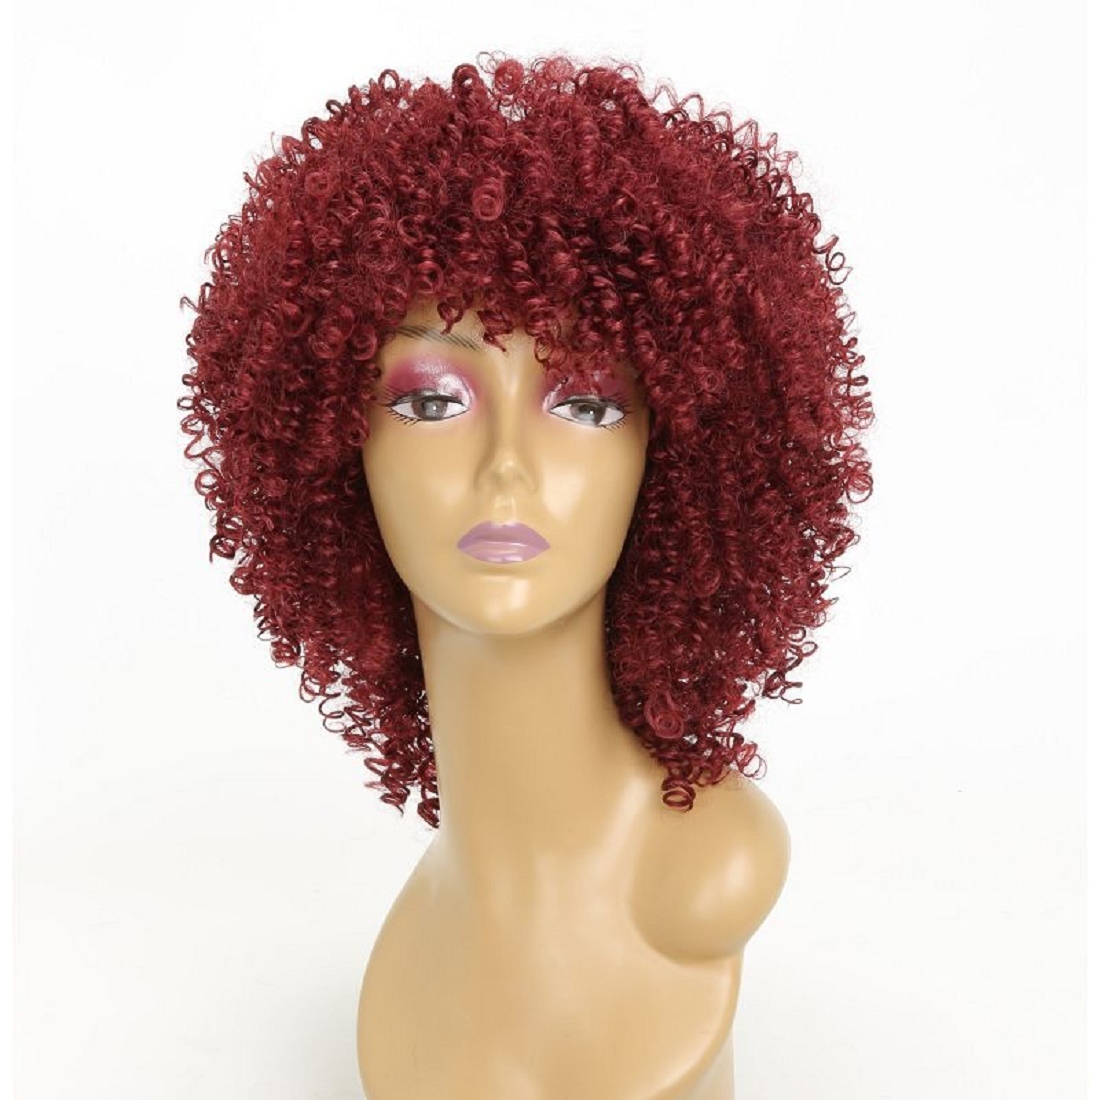 Loose Curls Synthetic Wigs for Women Short Curly Hair With Bangs Burgundy Color